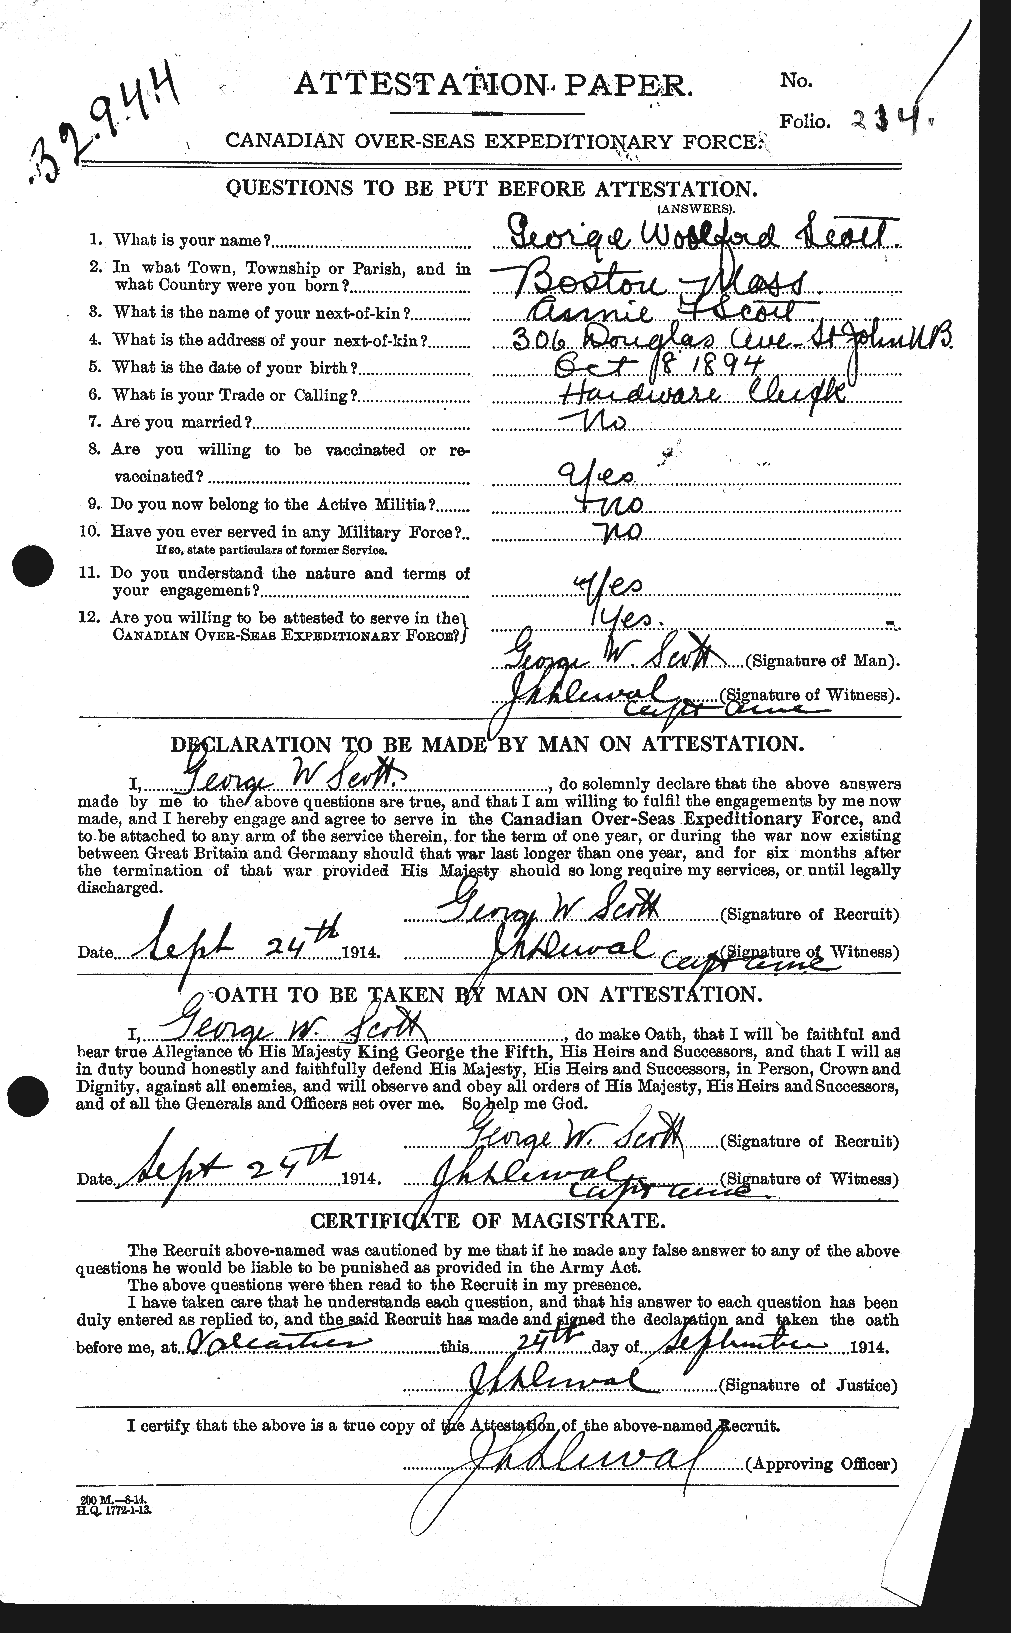 Personnel Records of the First World War - CEF 083126a